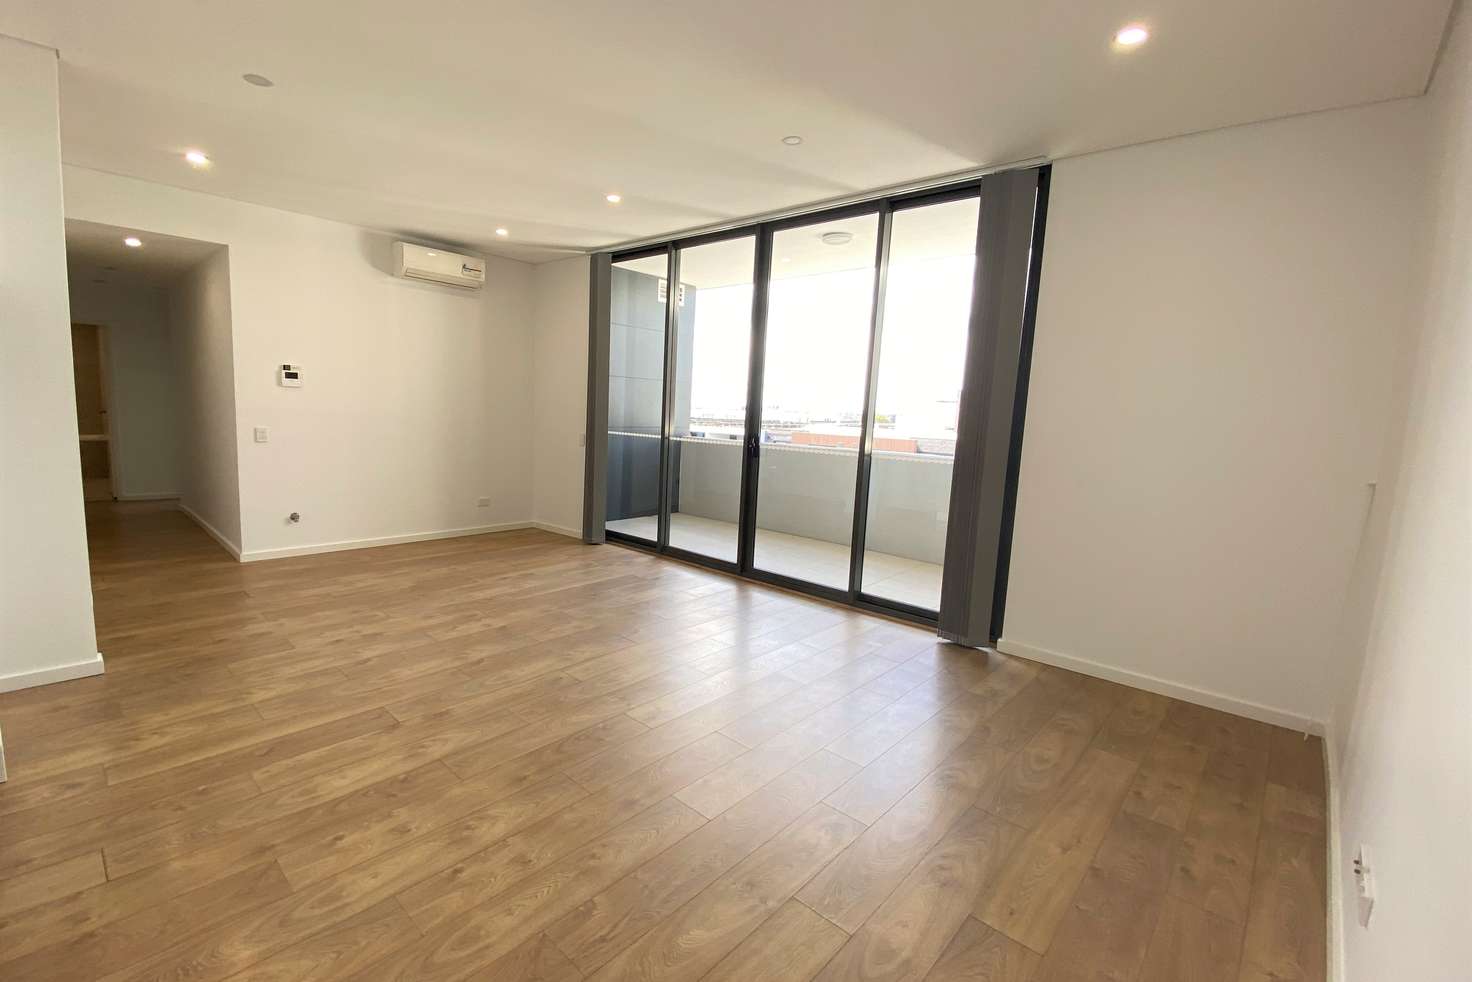 Main view of Homely apartment listing, 51/510-512 Burwood Road, Belmore NSW 2192